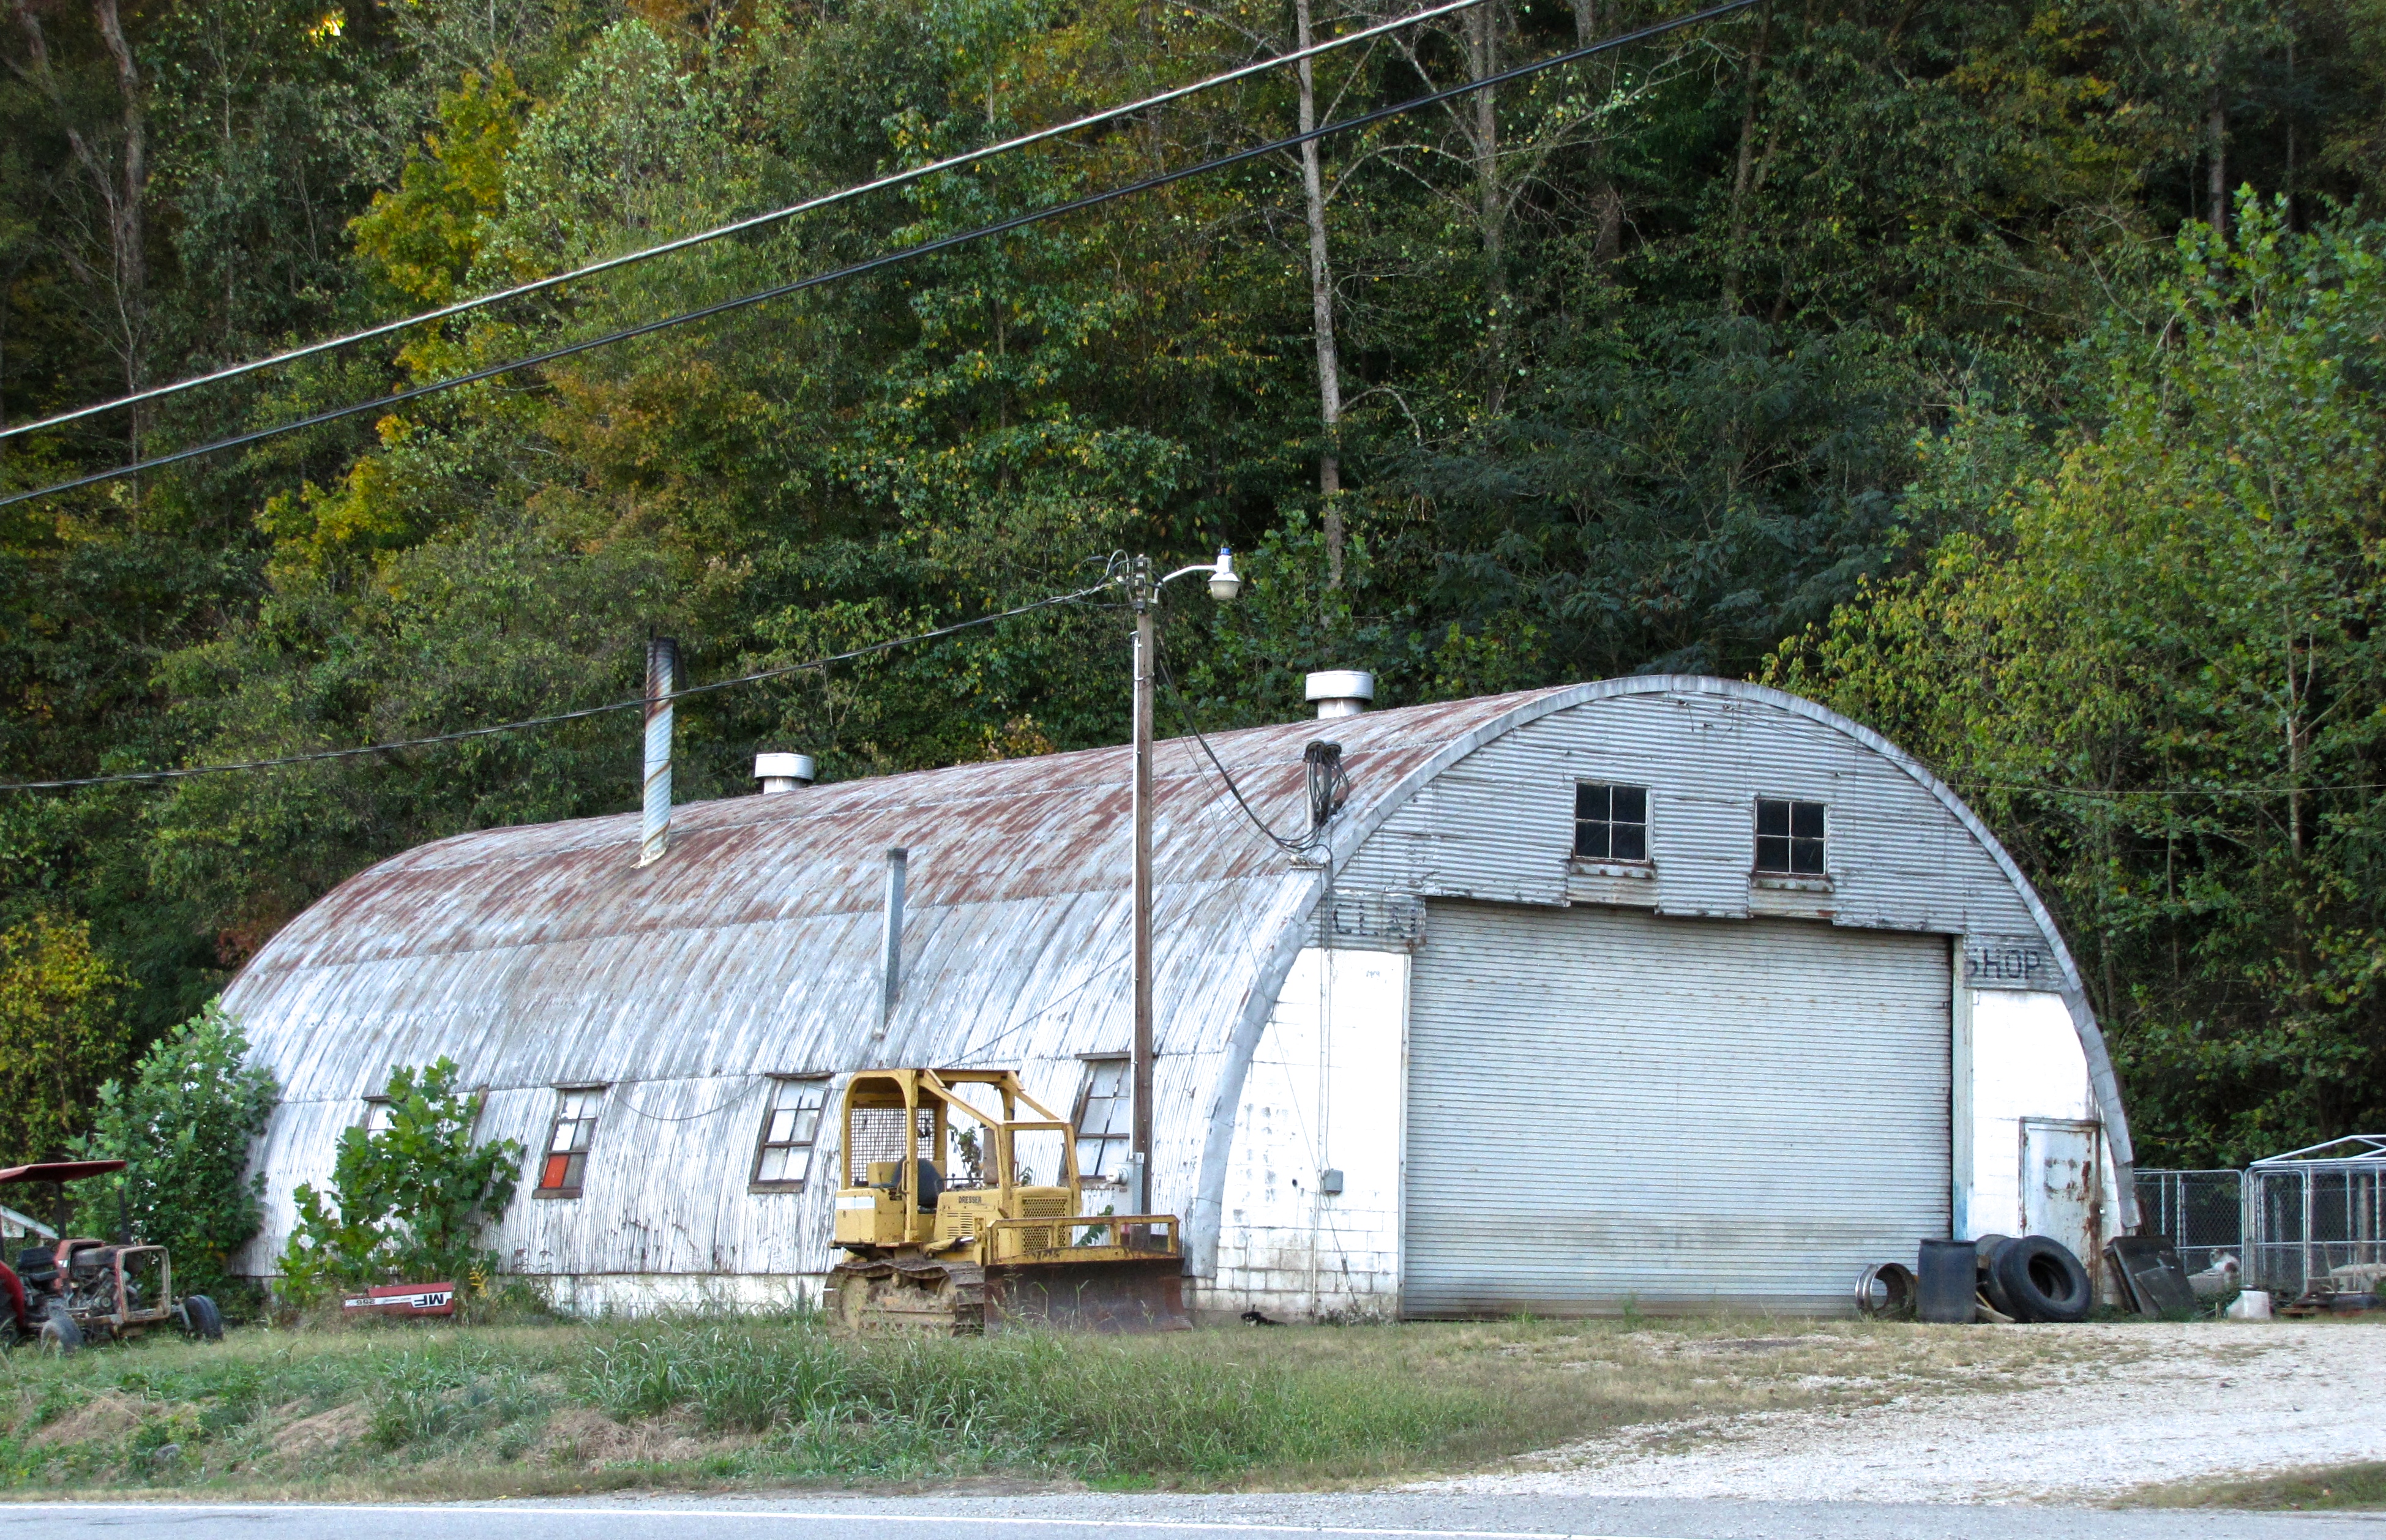 quonset hut in About Us, GA